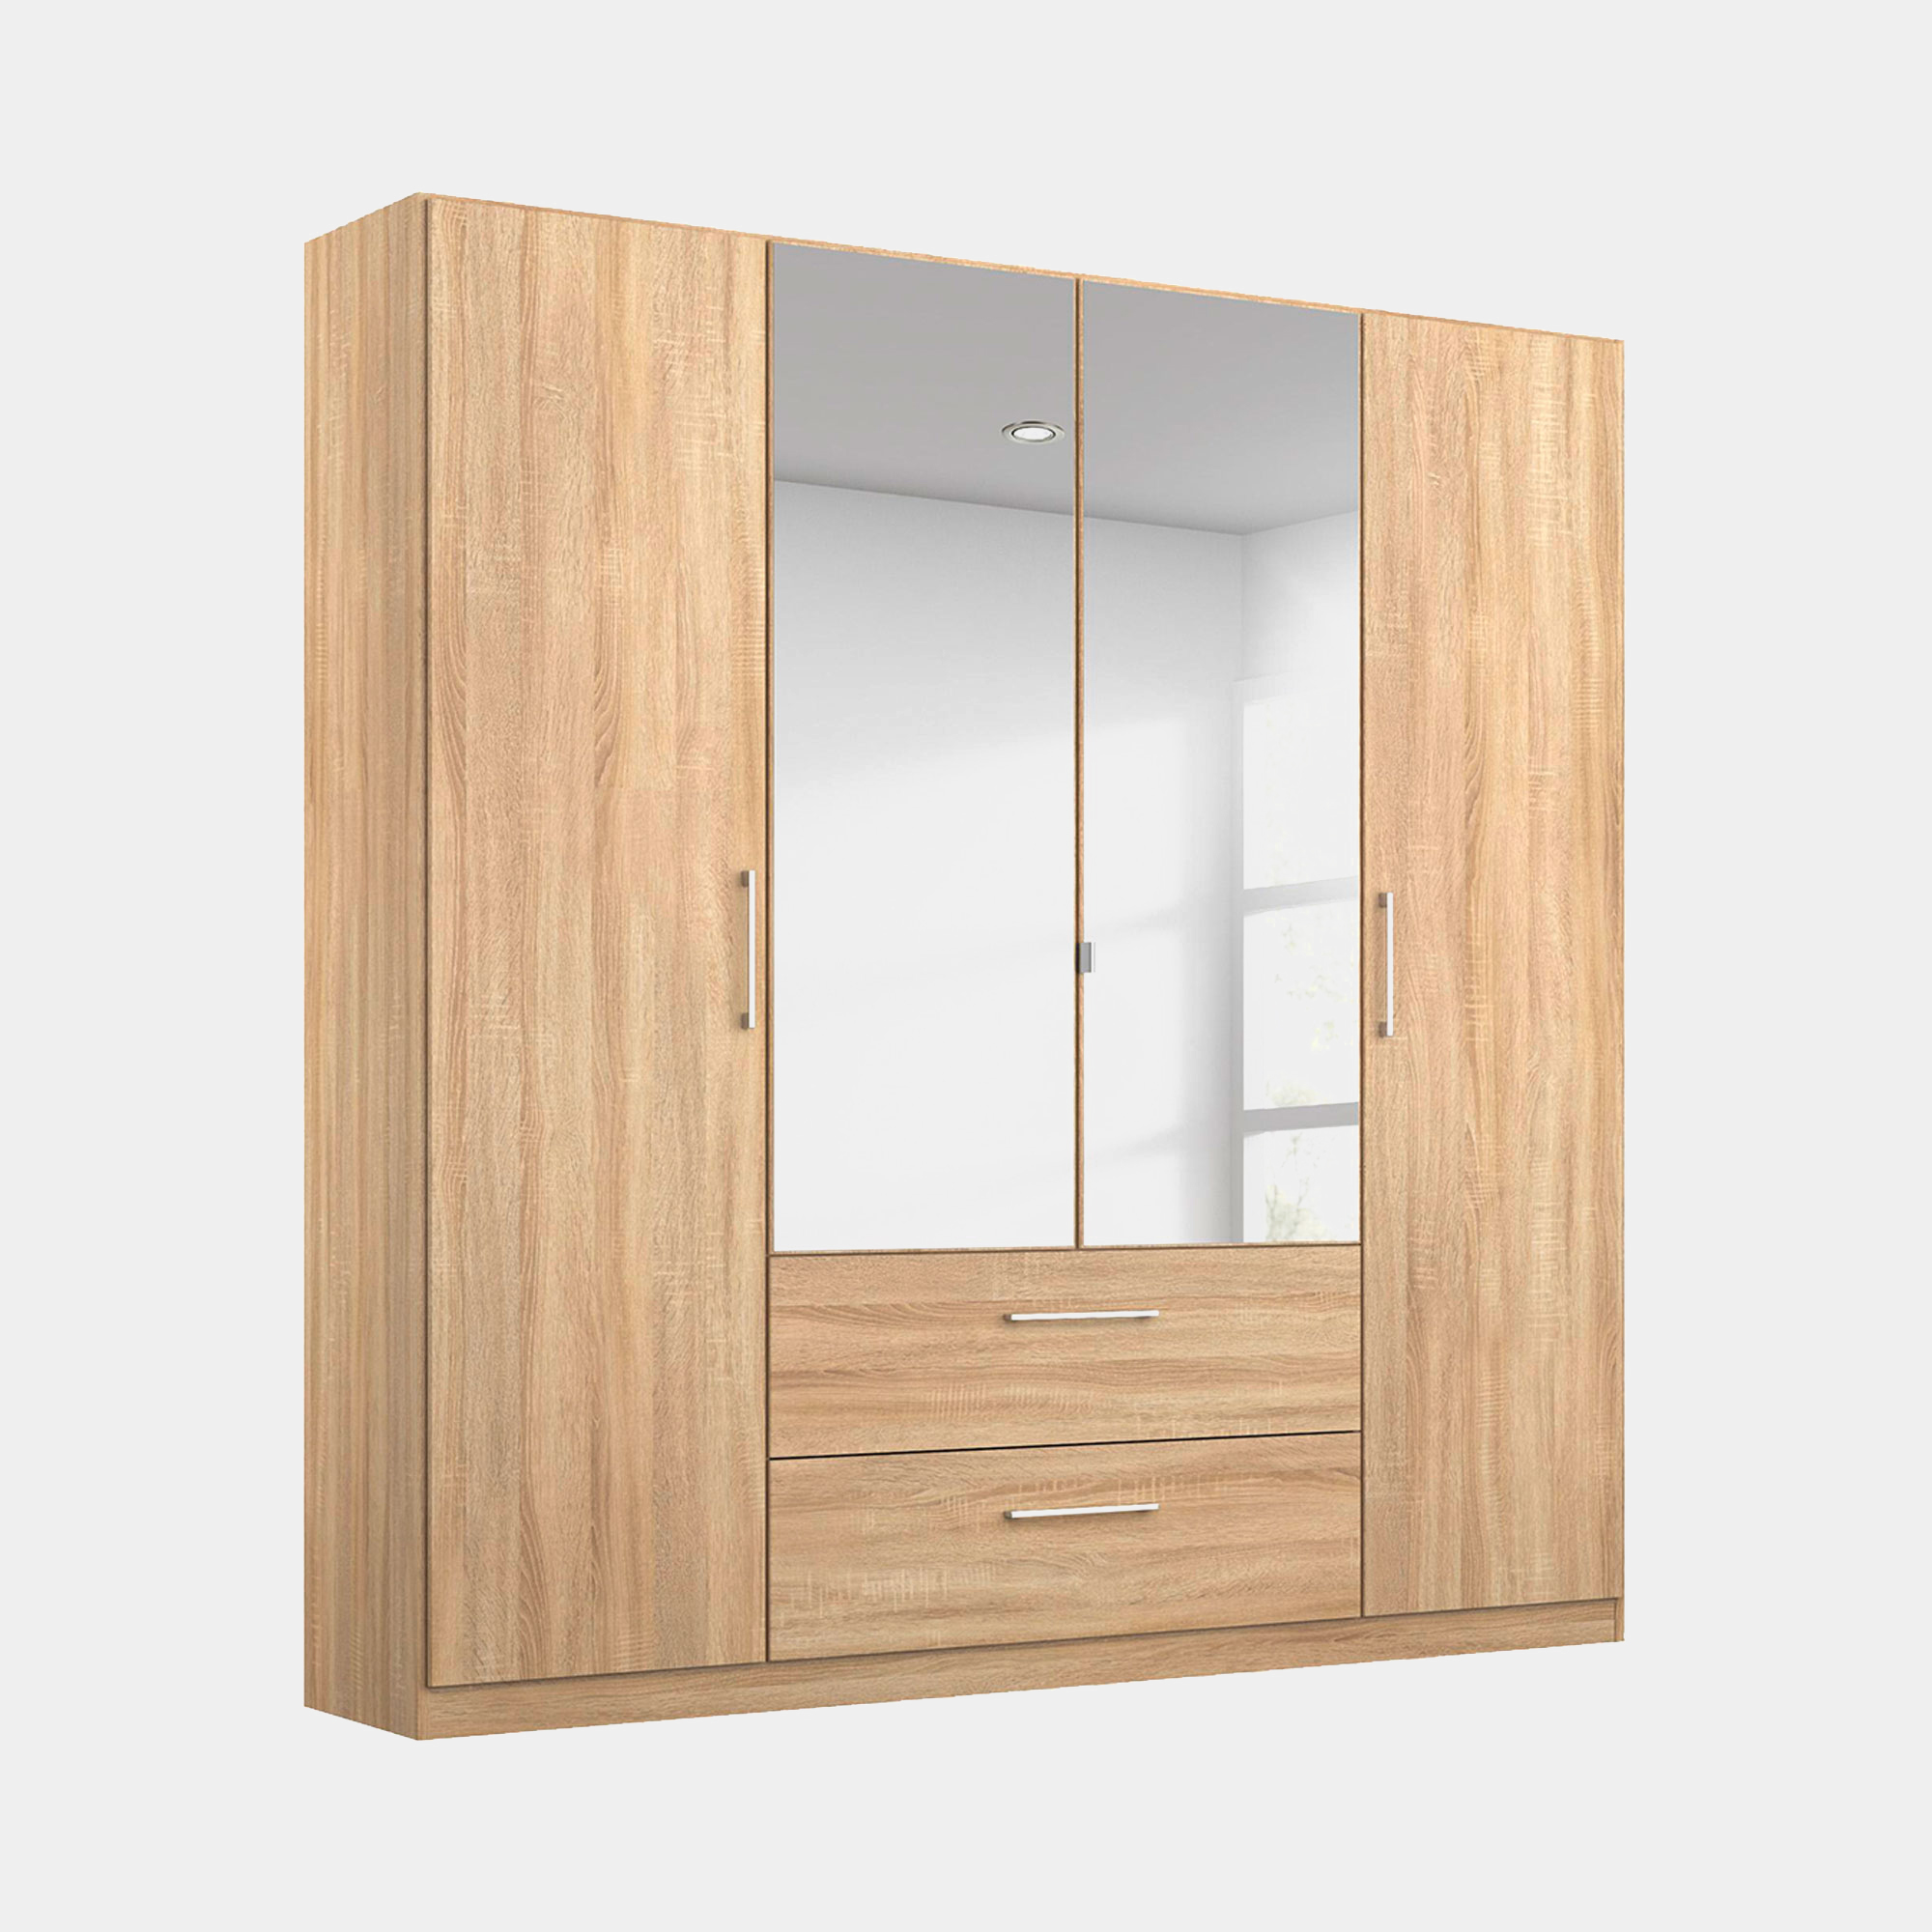 Cologne - Mirrored Combi Wardrobe - All Bedroom Ranges - Fishpools